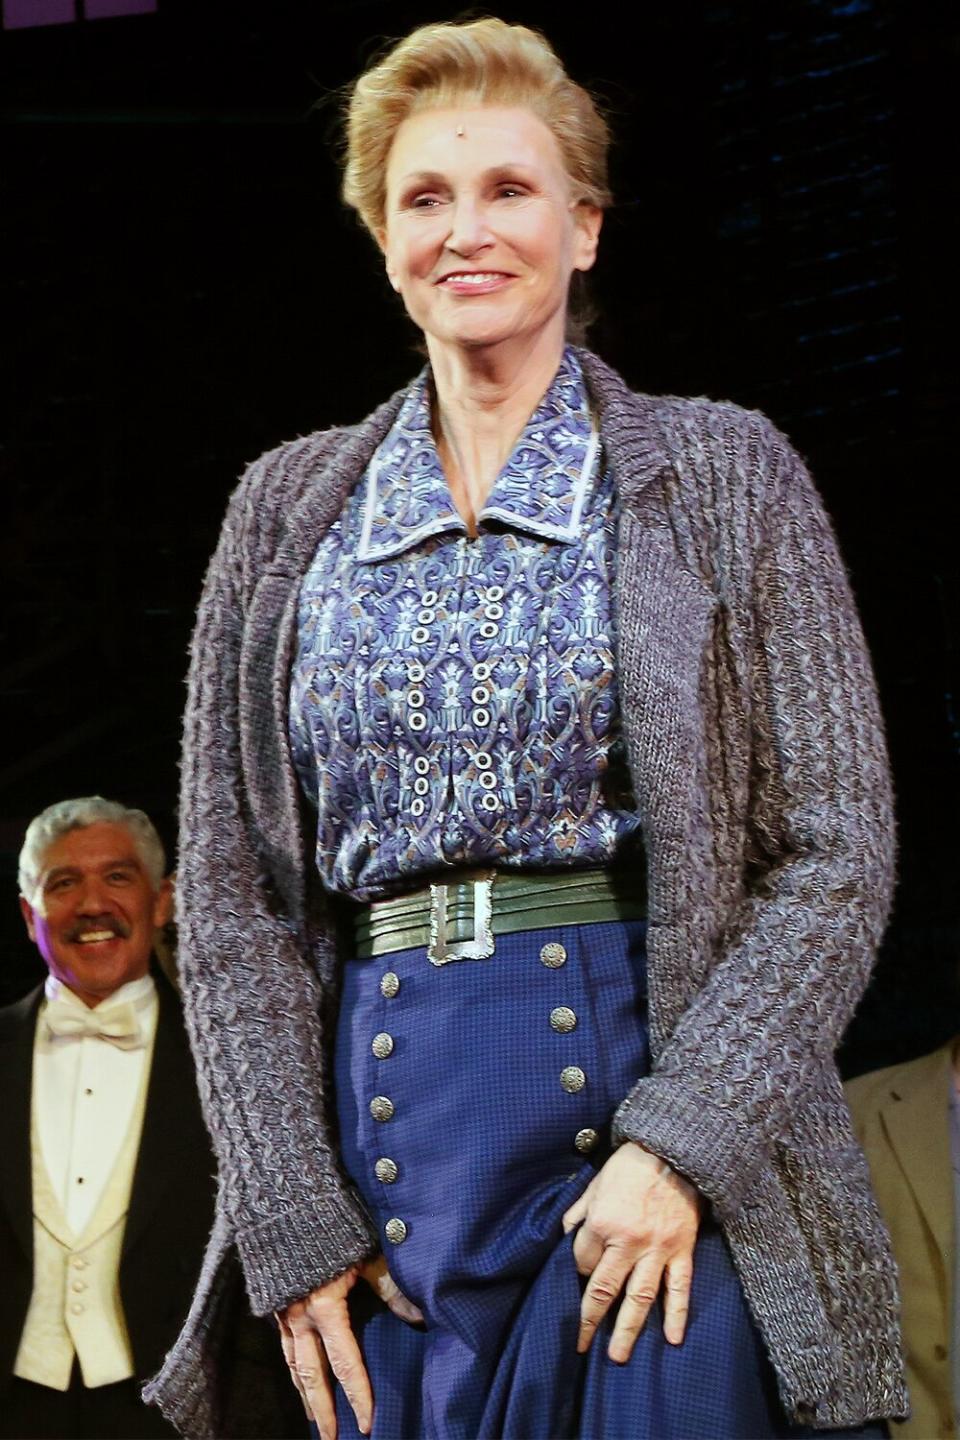 NEW YORK, NEW YORK - APRIL 24: Jane Lynch as "Rosie Brice" during the opening night curtain call for the musical "Funny Girl" on Broadway at The August Wilson Theatre on April 24, 2022 in New York City. (Photo by Bruce Glikas/WireImage)